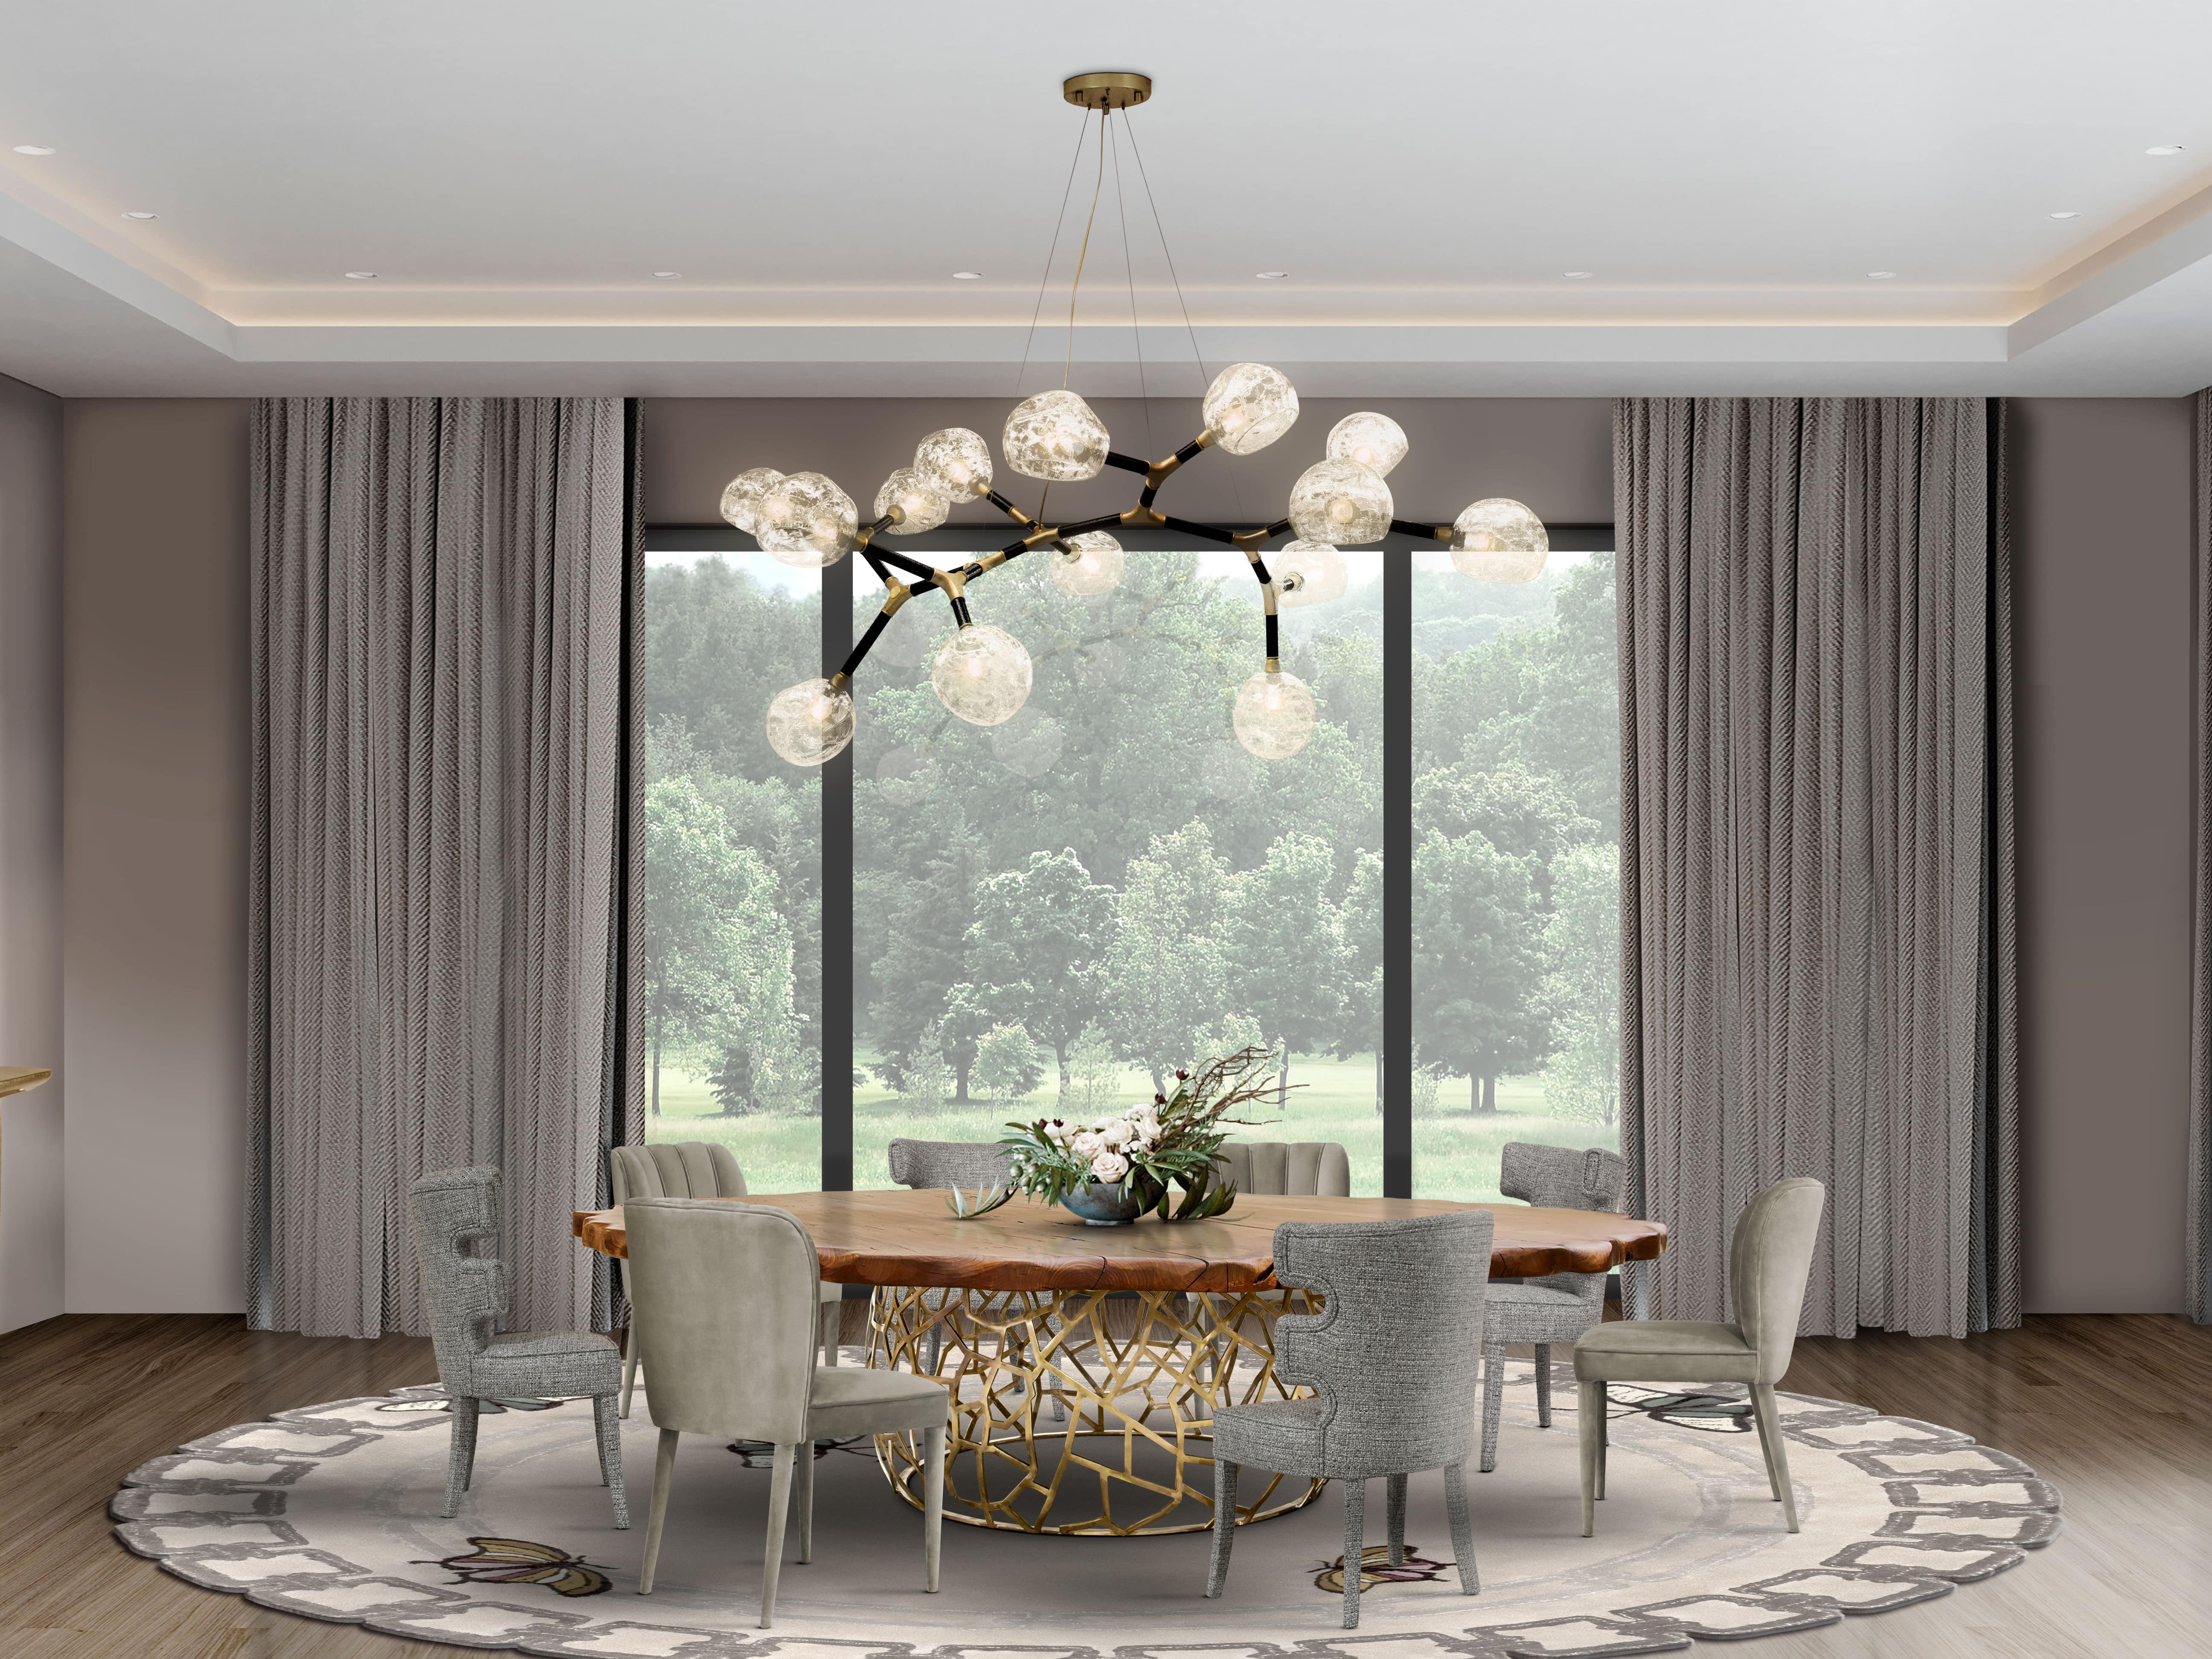 Matte Brass In A Modern Dining Room Design - Home'Society